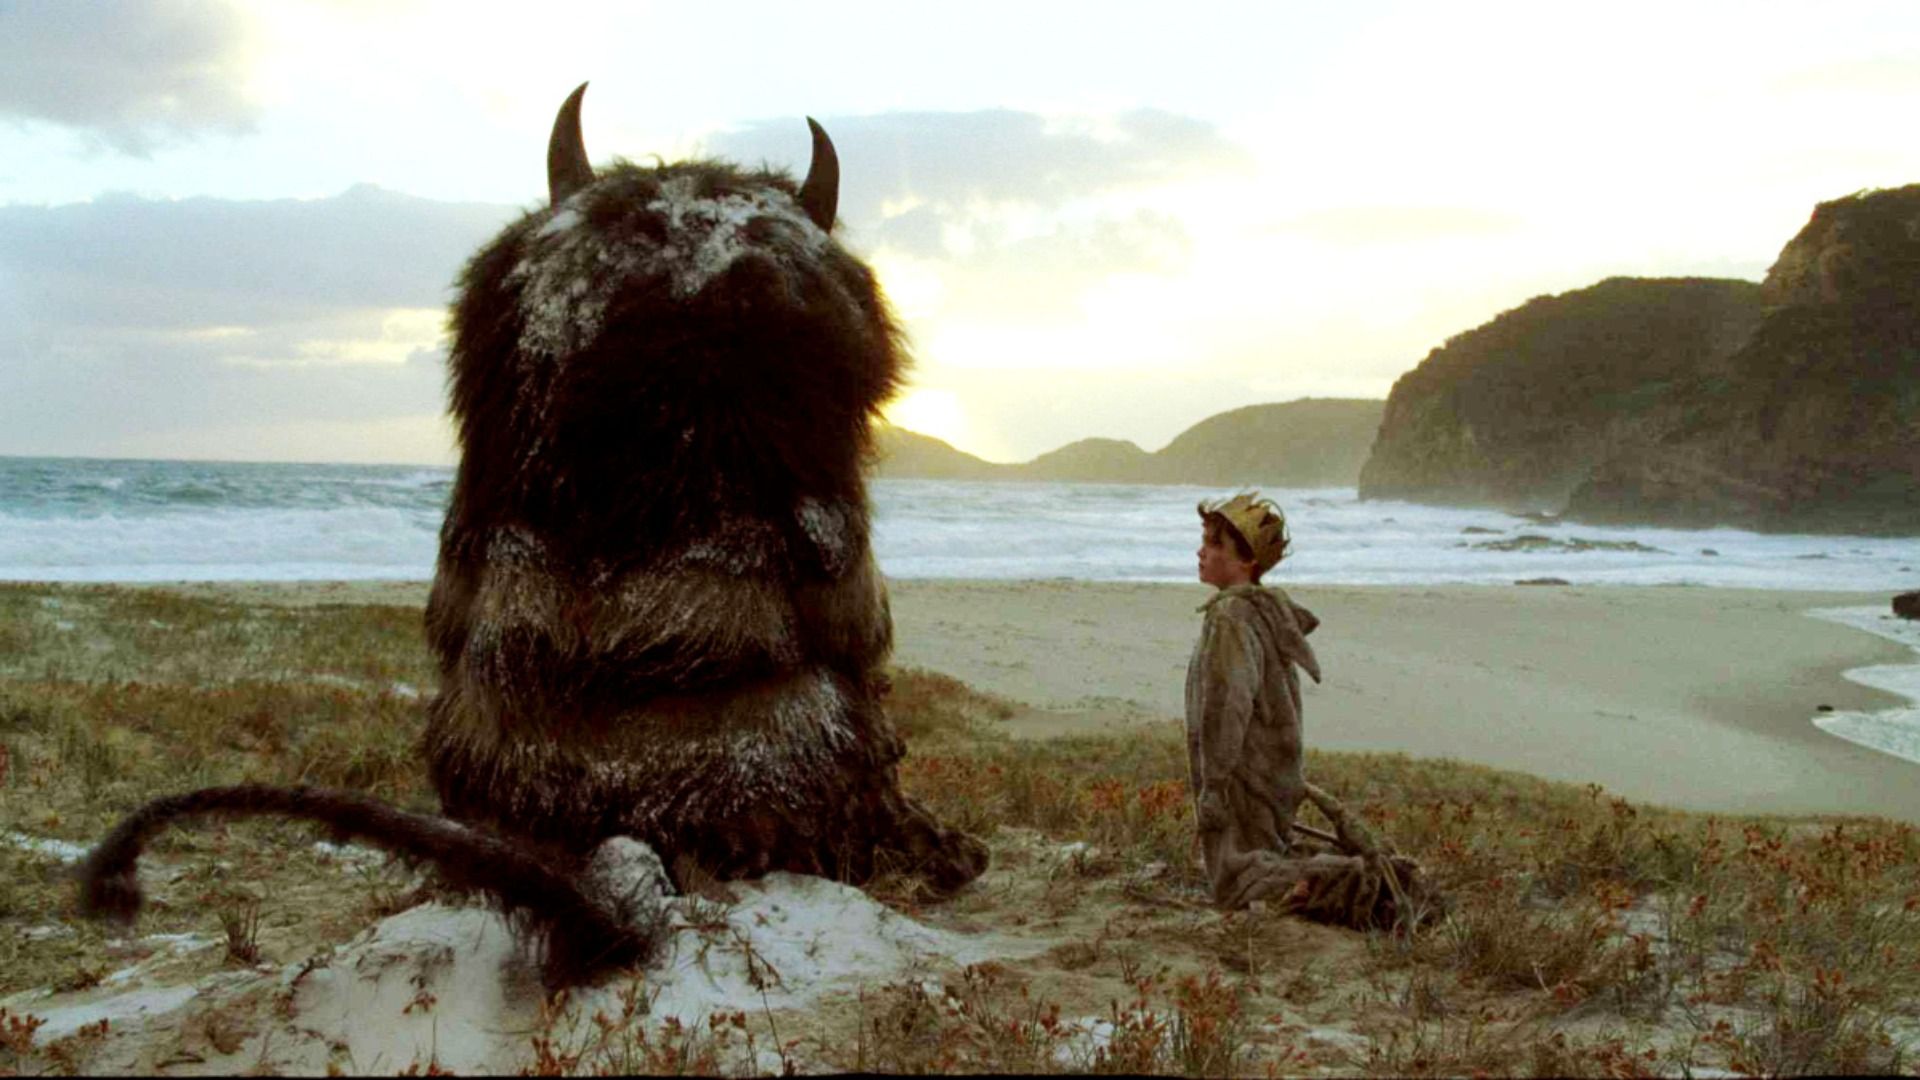 Where the Wild Things Are at 10: The best movie about childhood not for children